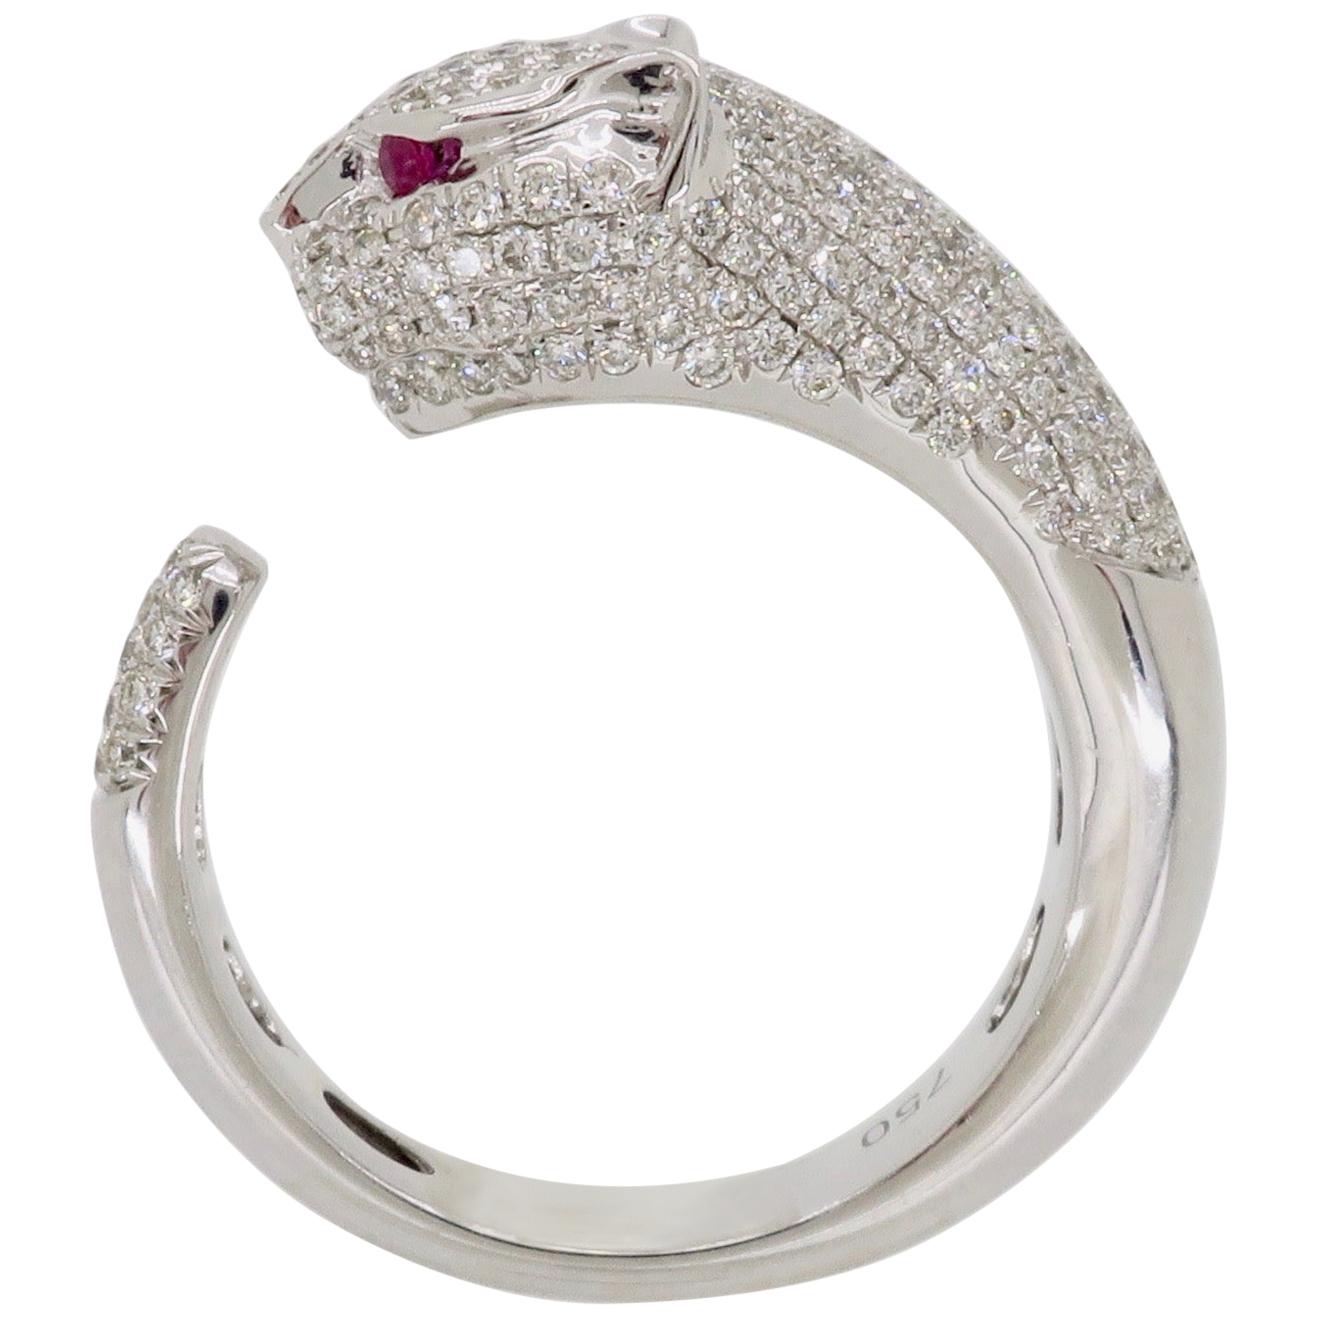 Panther Diamond and Ruby Ring Made in 18 Karat White Gold